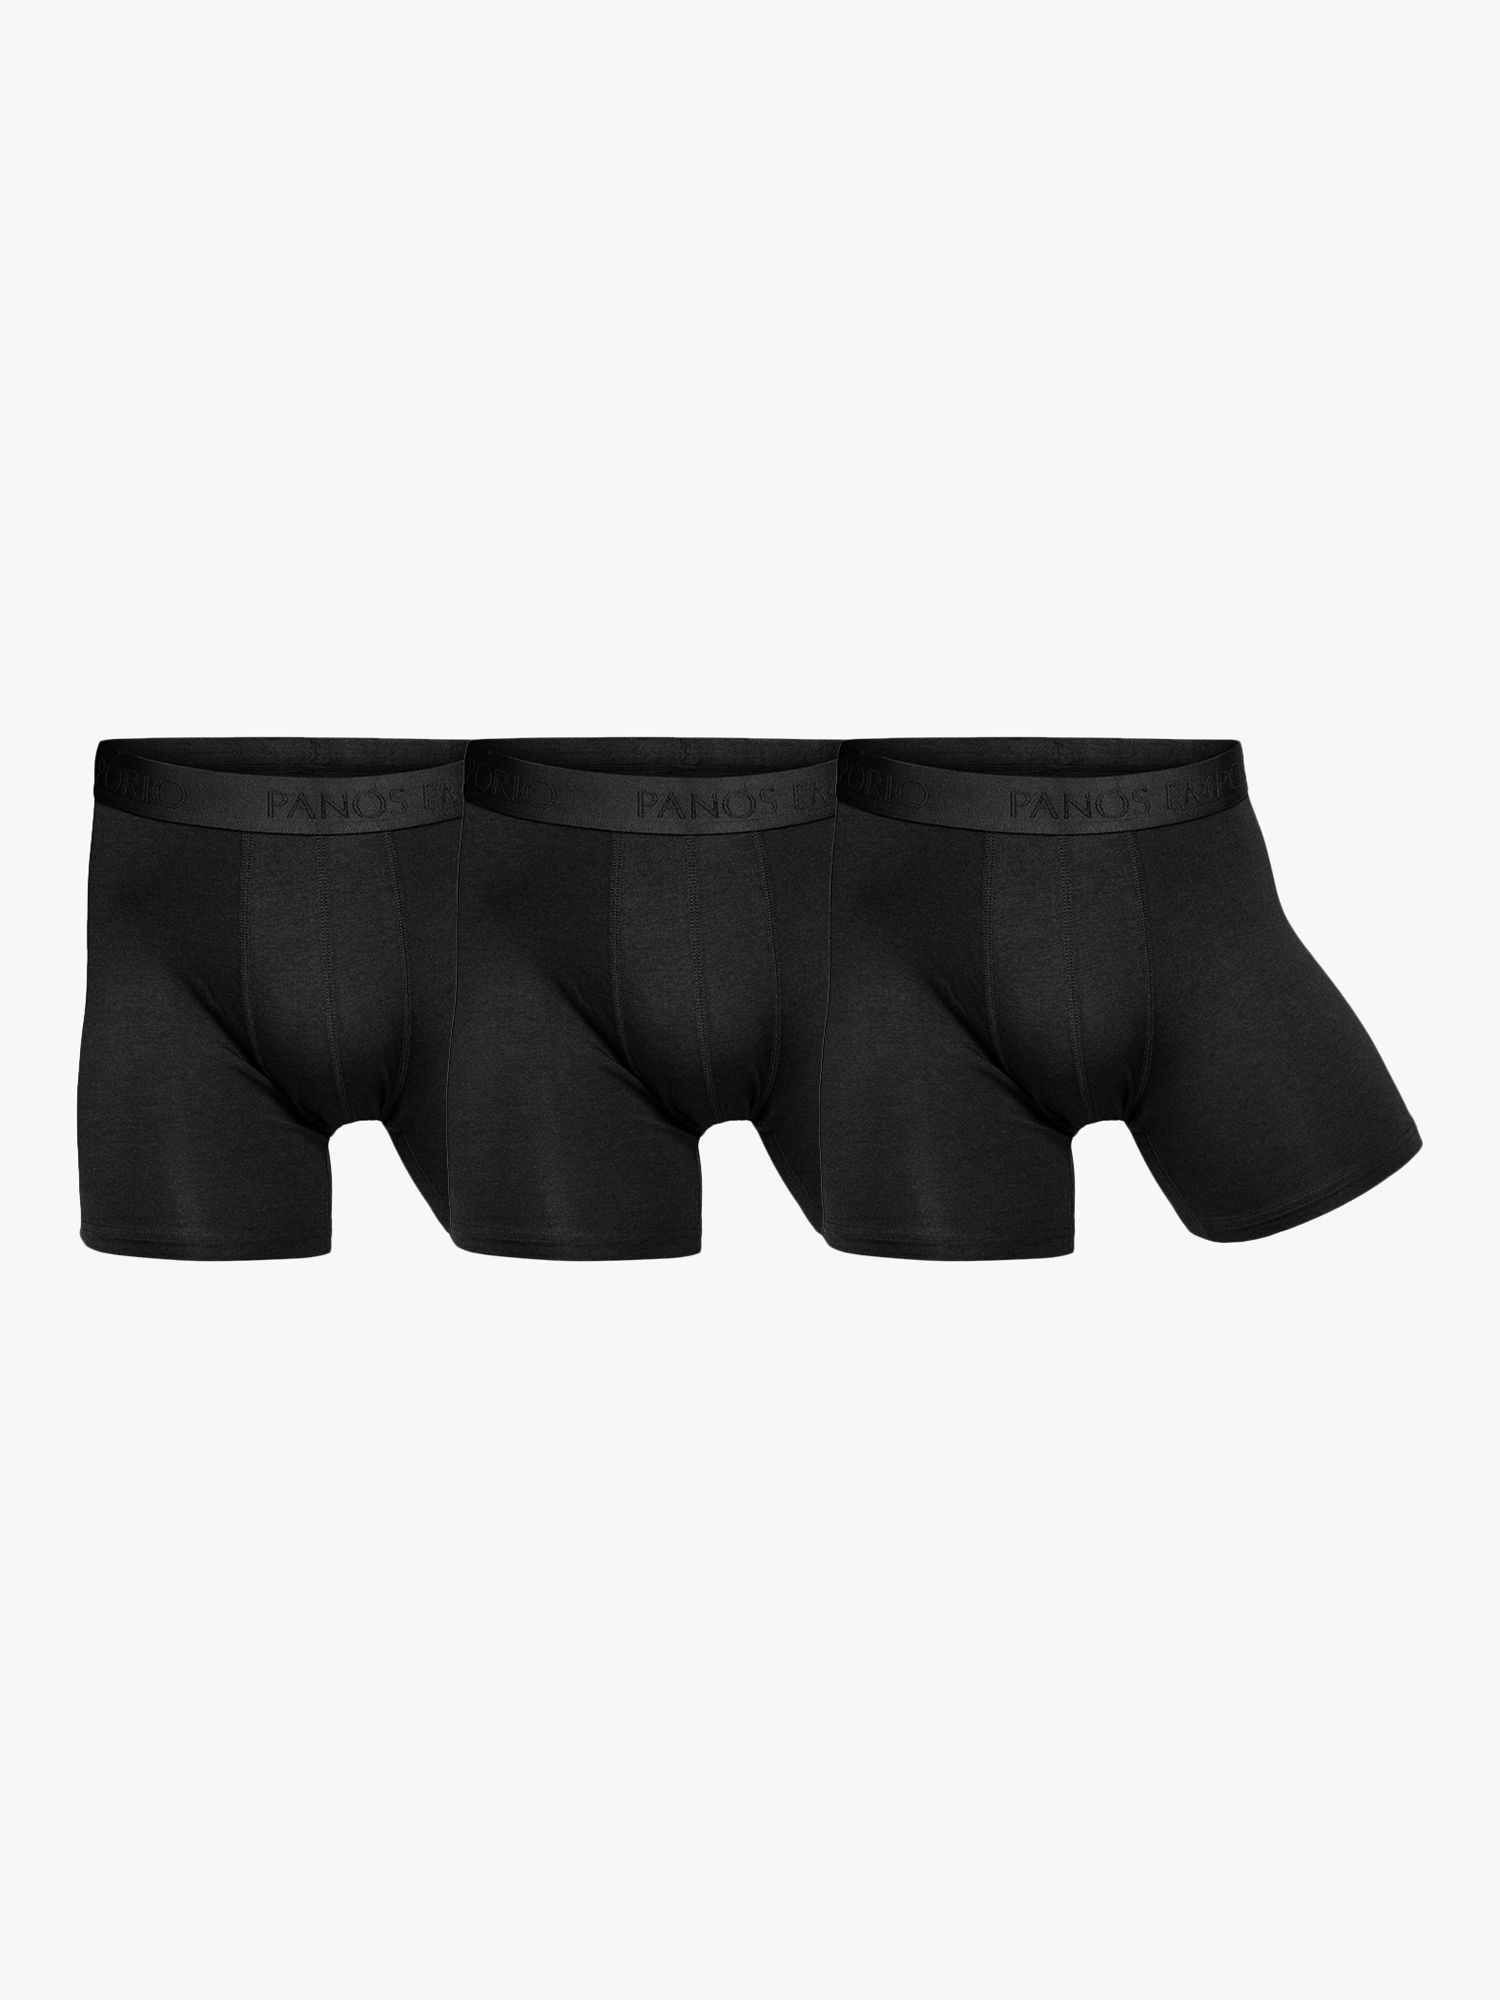 Panos Emporio Eco Bamboo and Organic Cotton Blend Trunks, Pack of 3, Black, S